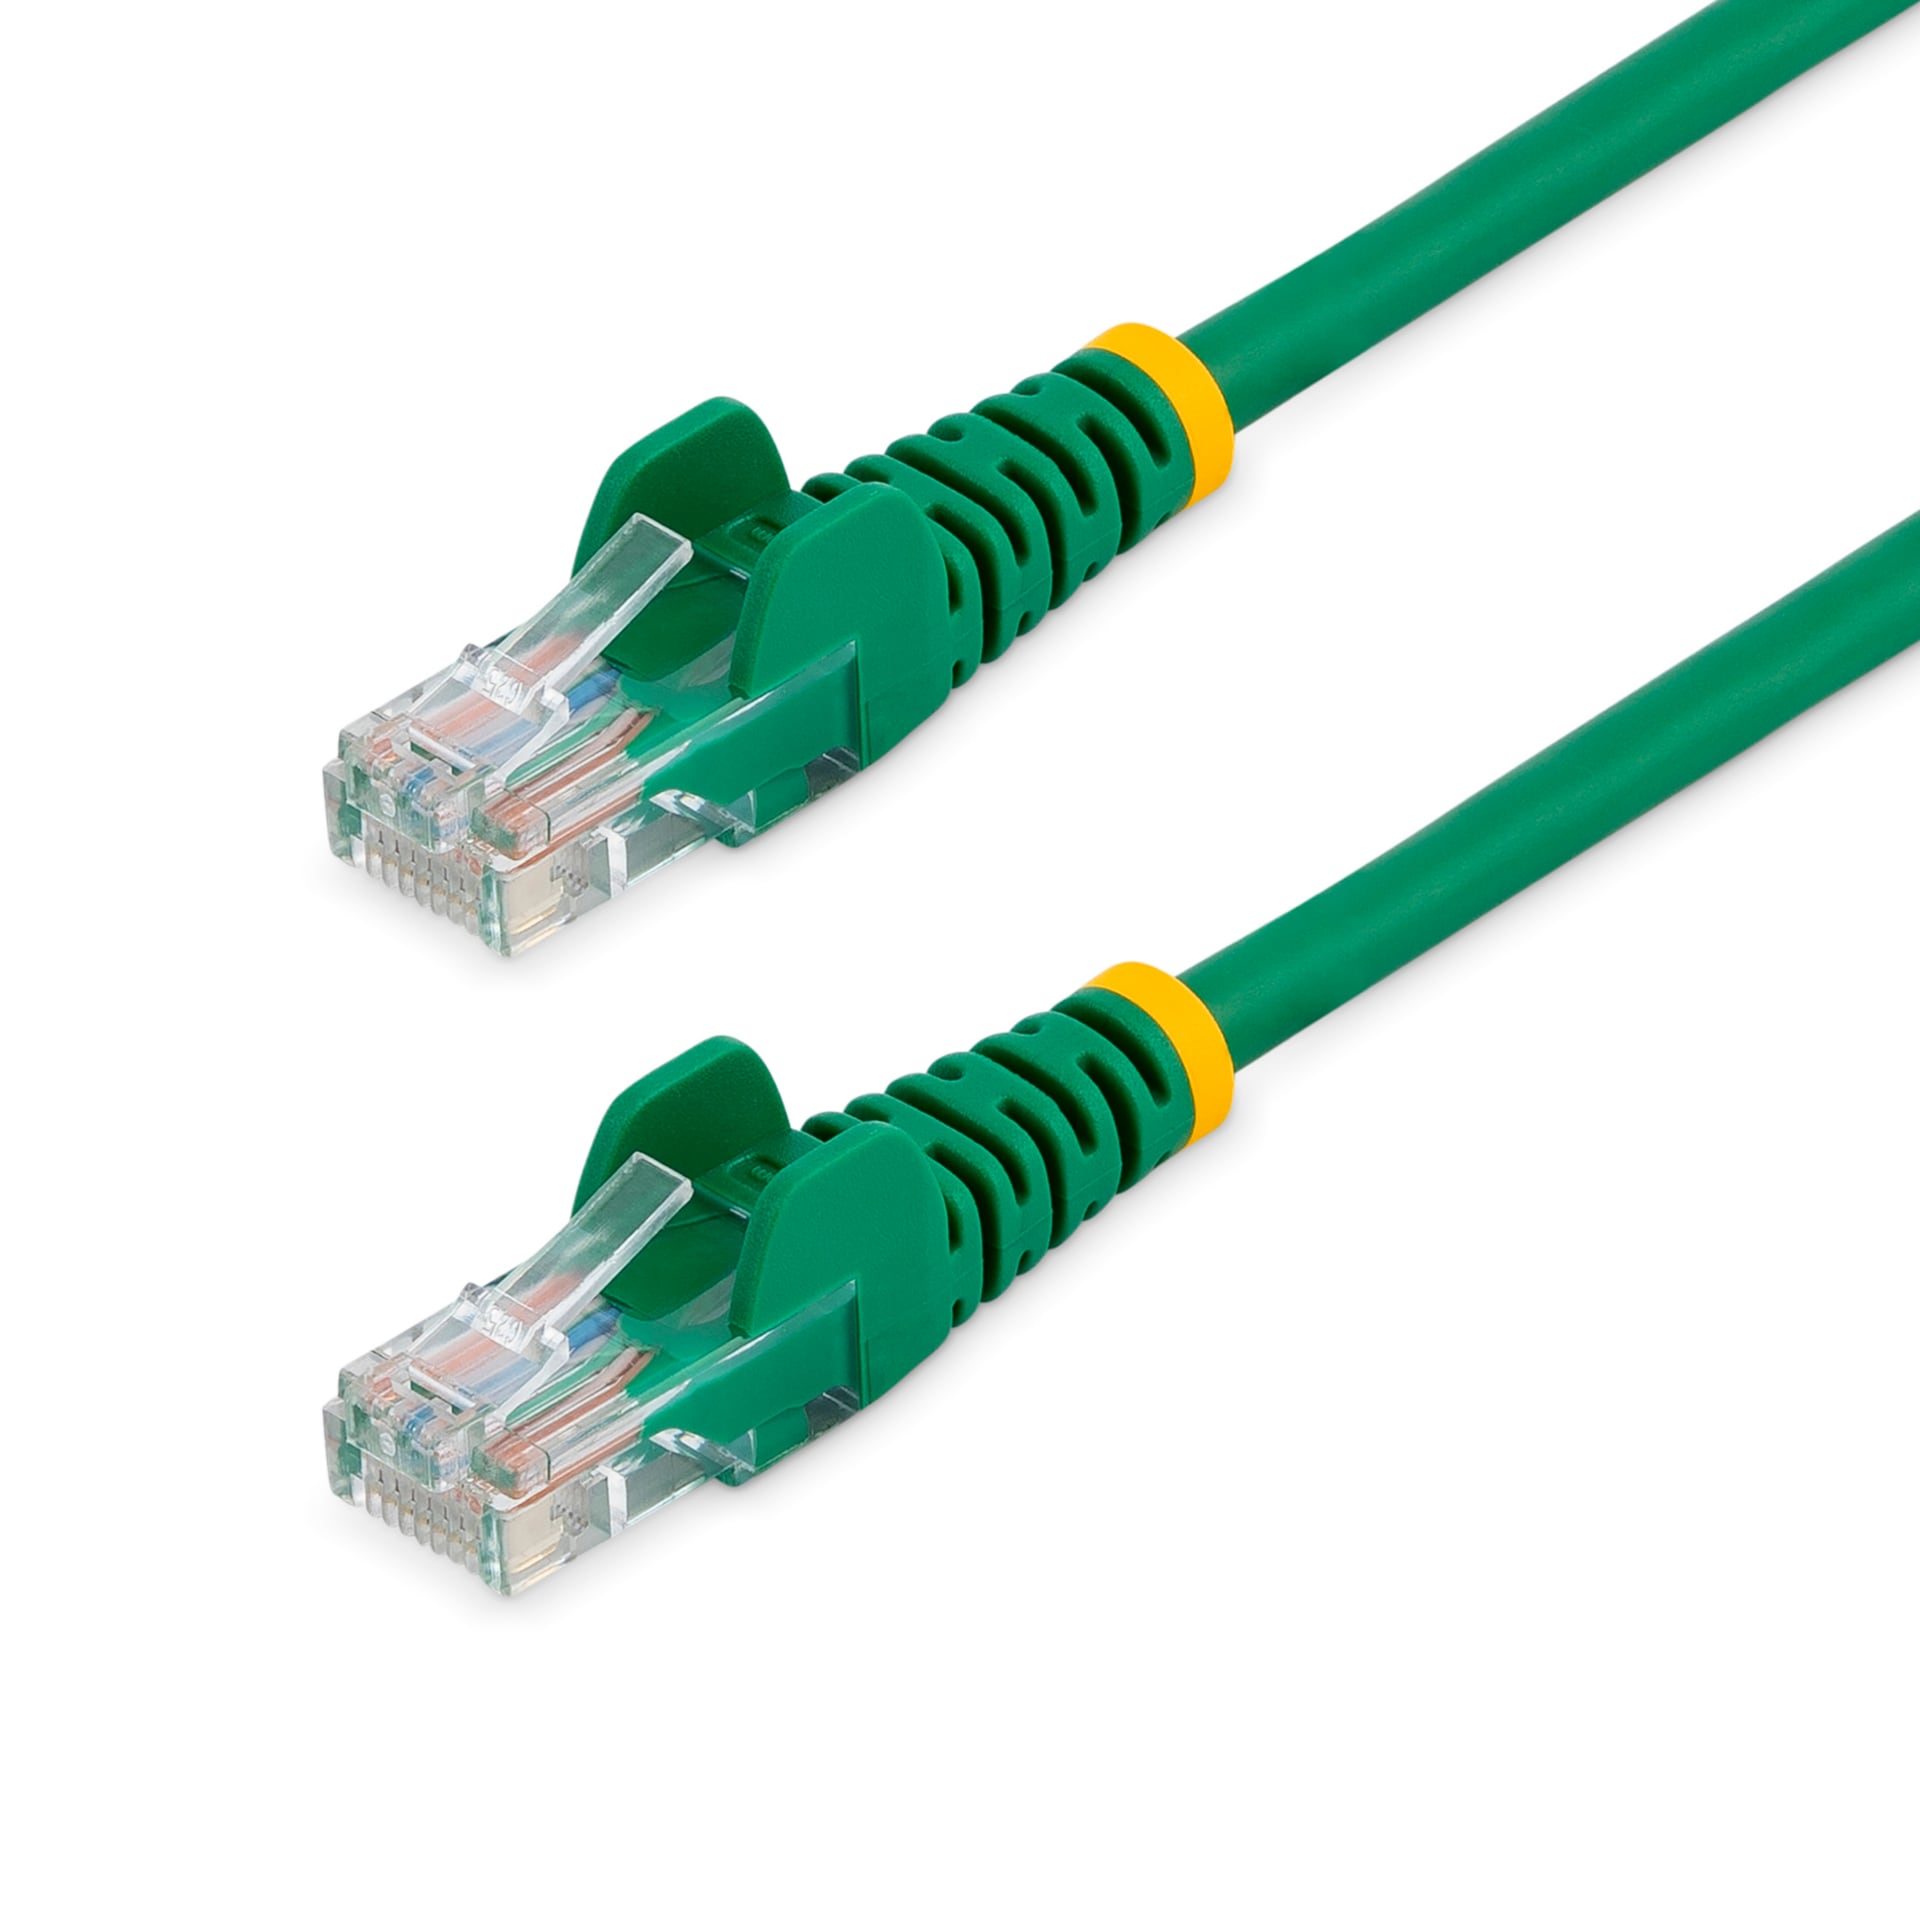 StarTech.com Cat5e Ethernet Cable 25 ft Green - Cat 5e Snagless Patch Cable